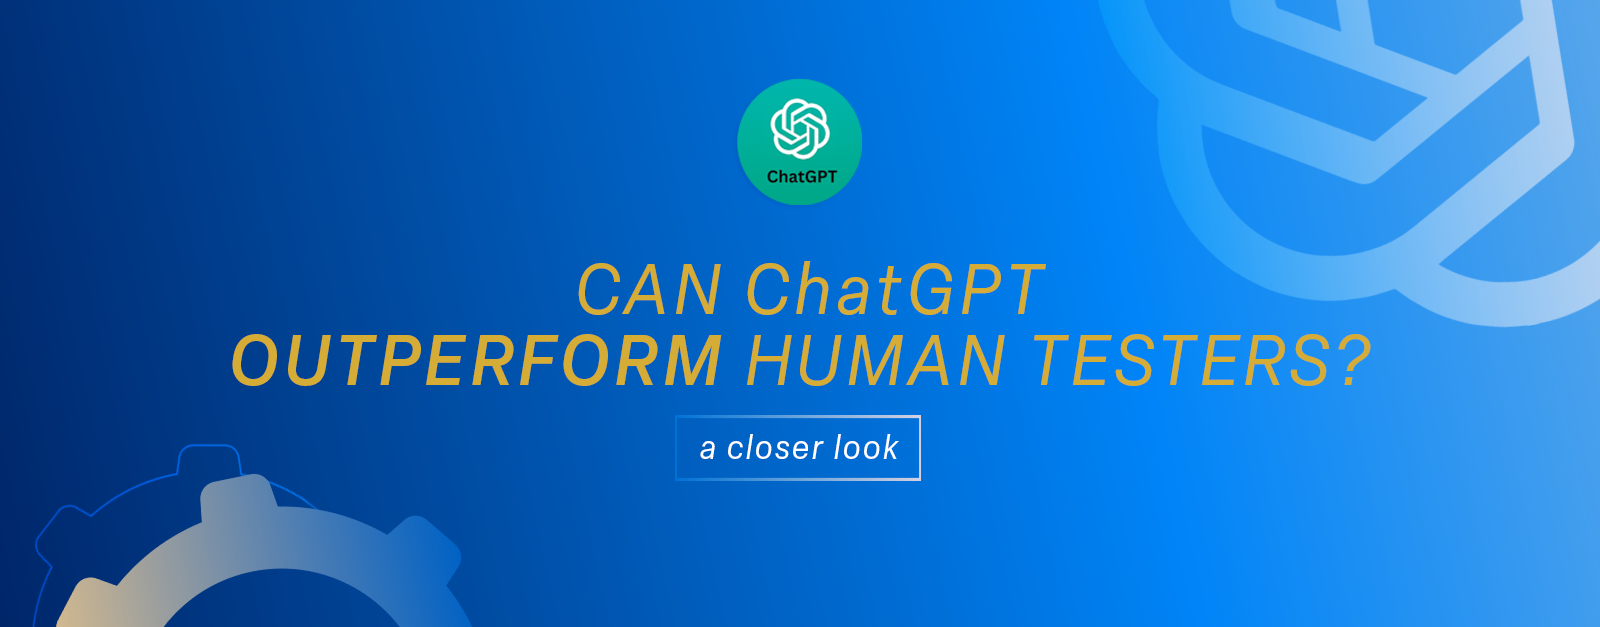 Website-Can-ChatGPT-Outperform-Human-Testers----A-Closer-Look